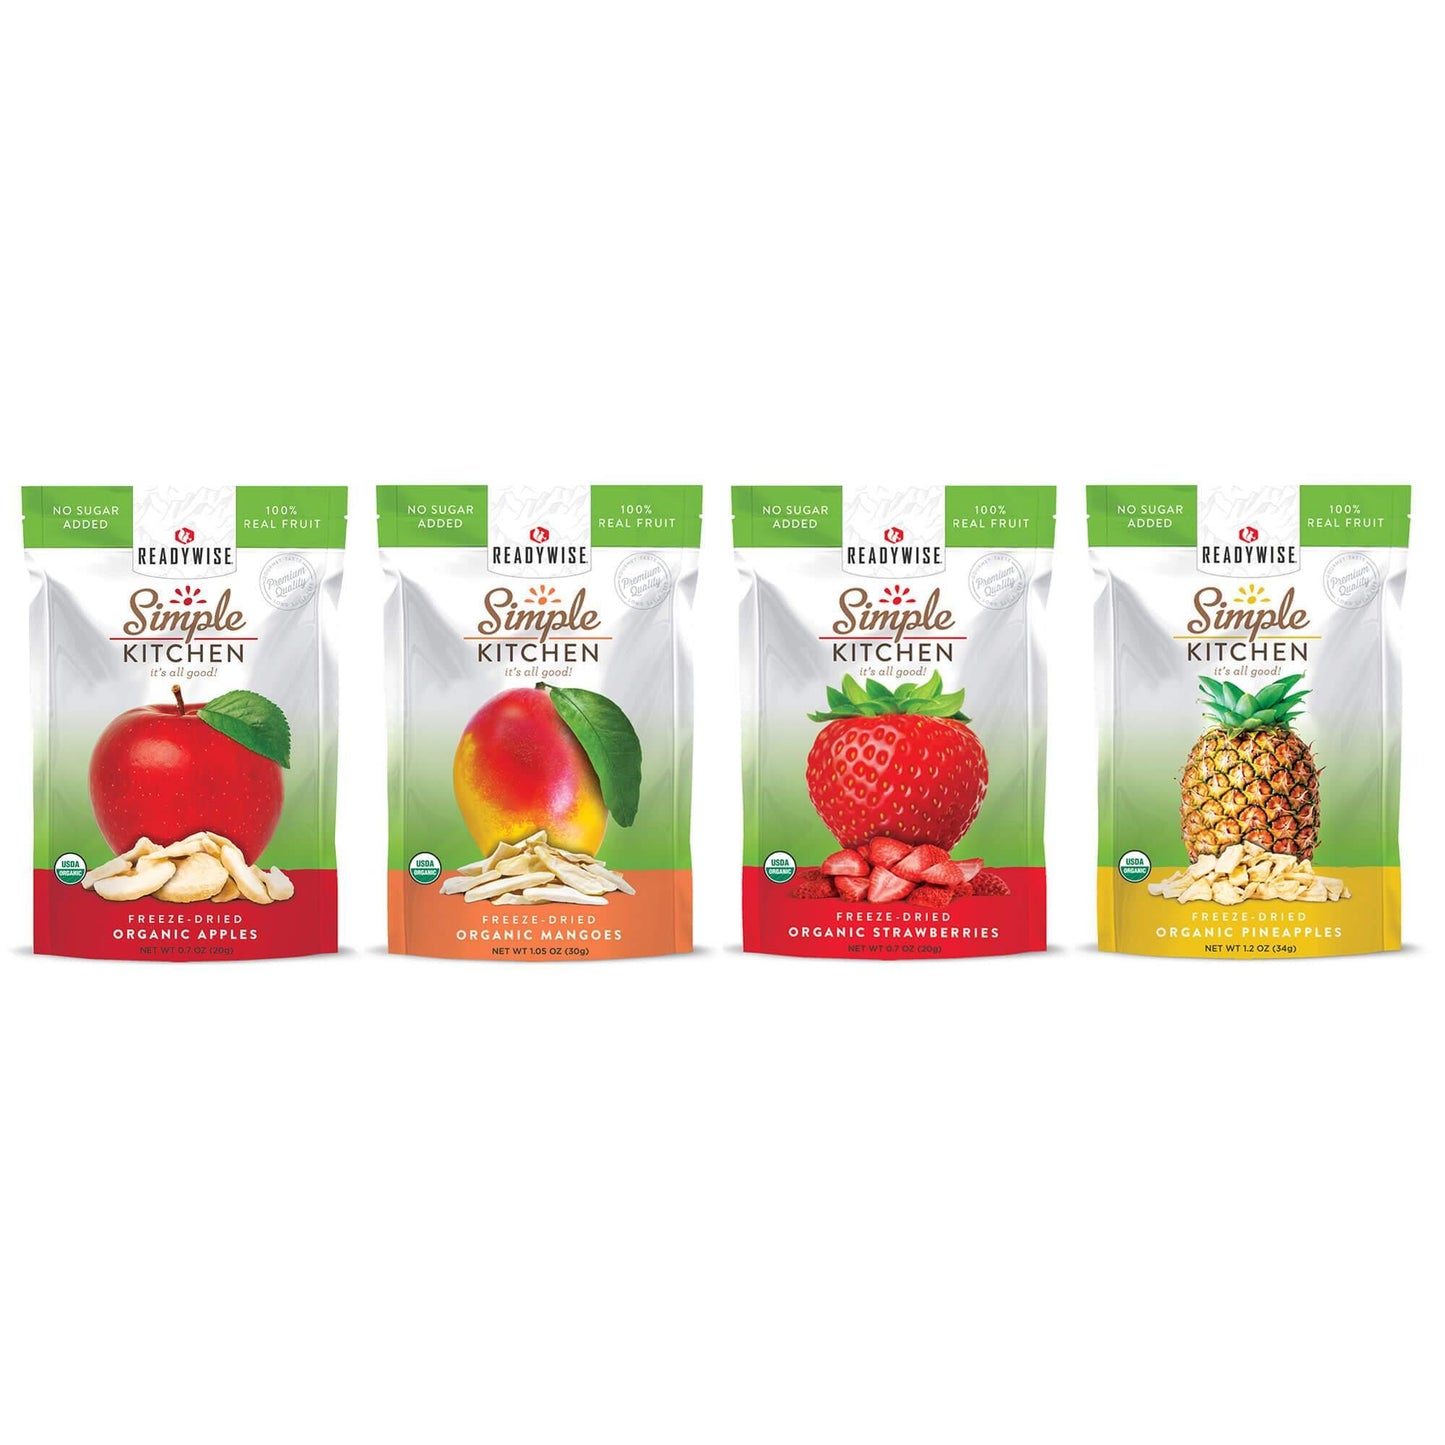 Simple Kitchen Organic Fruit Variety Pack - Simple Kitchen Foods